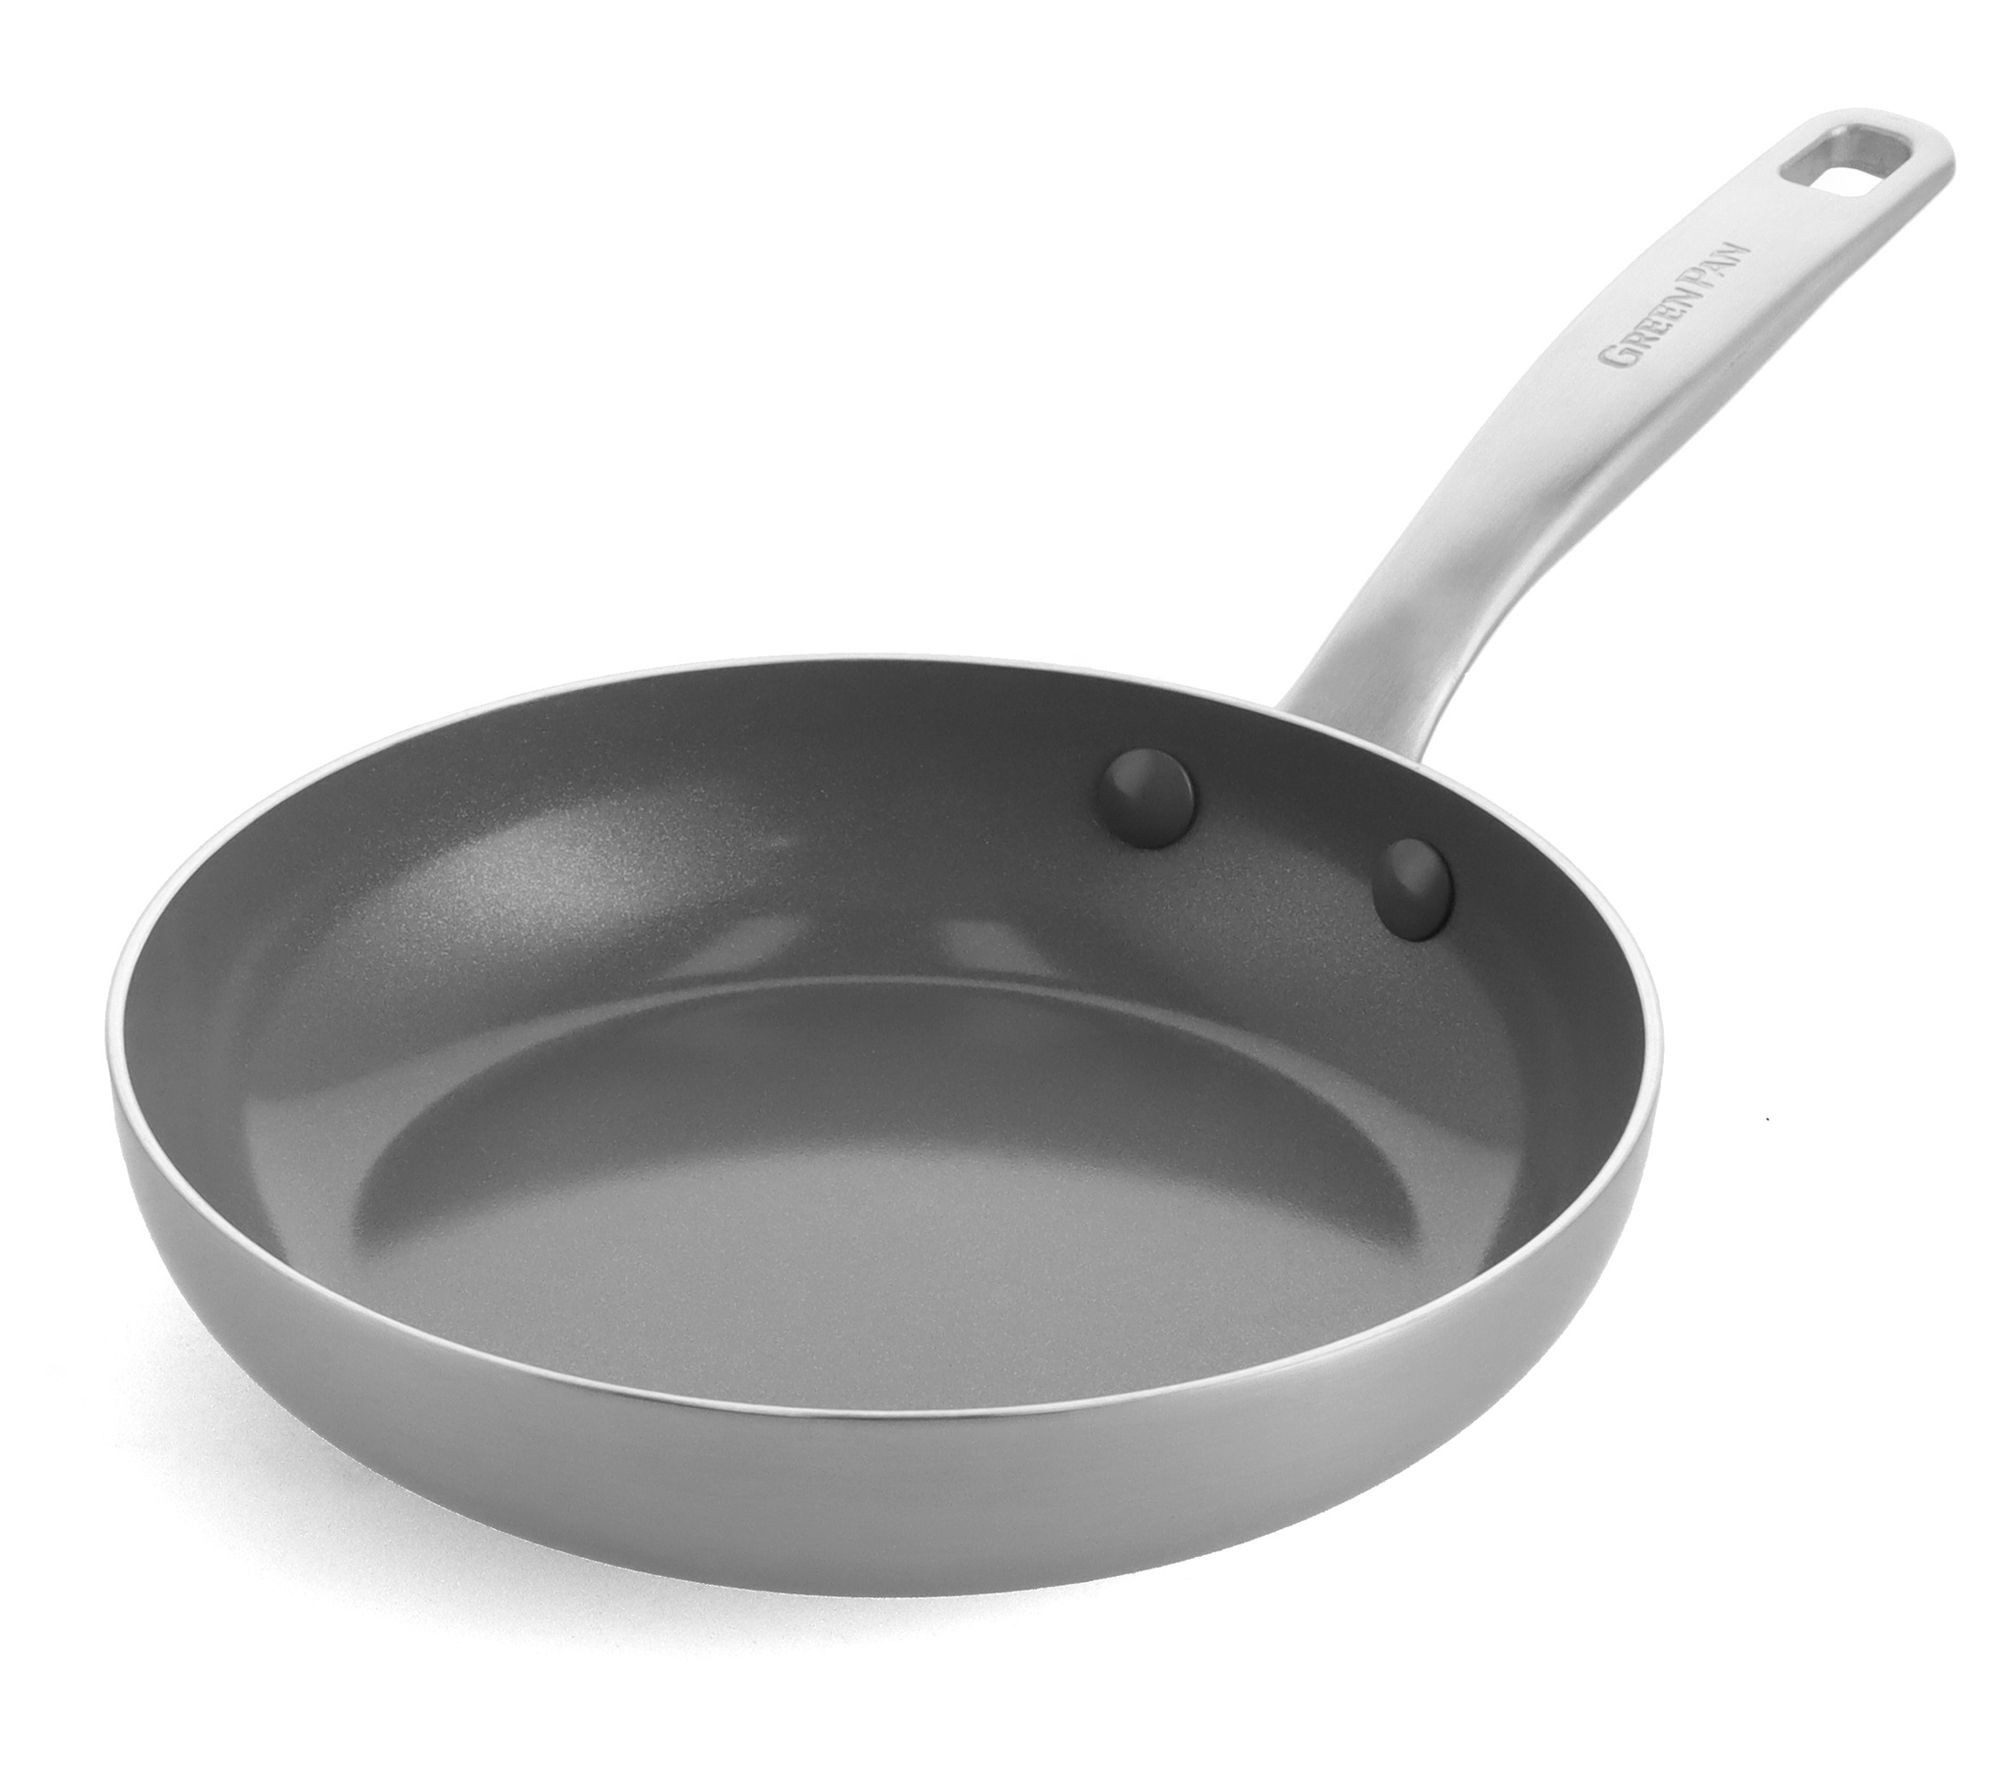 Ceramic Fry Pan Trio, Non-Toxic Coating for Frying